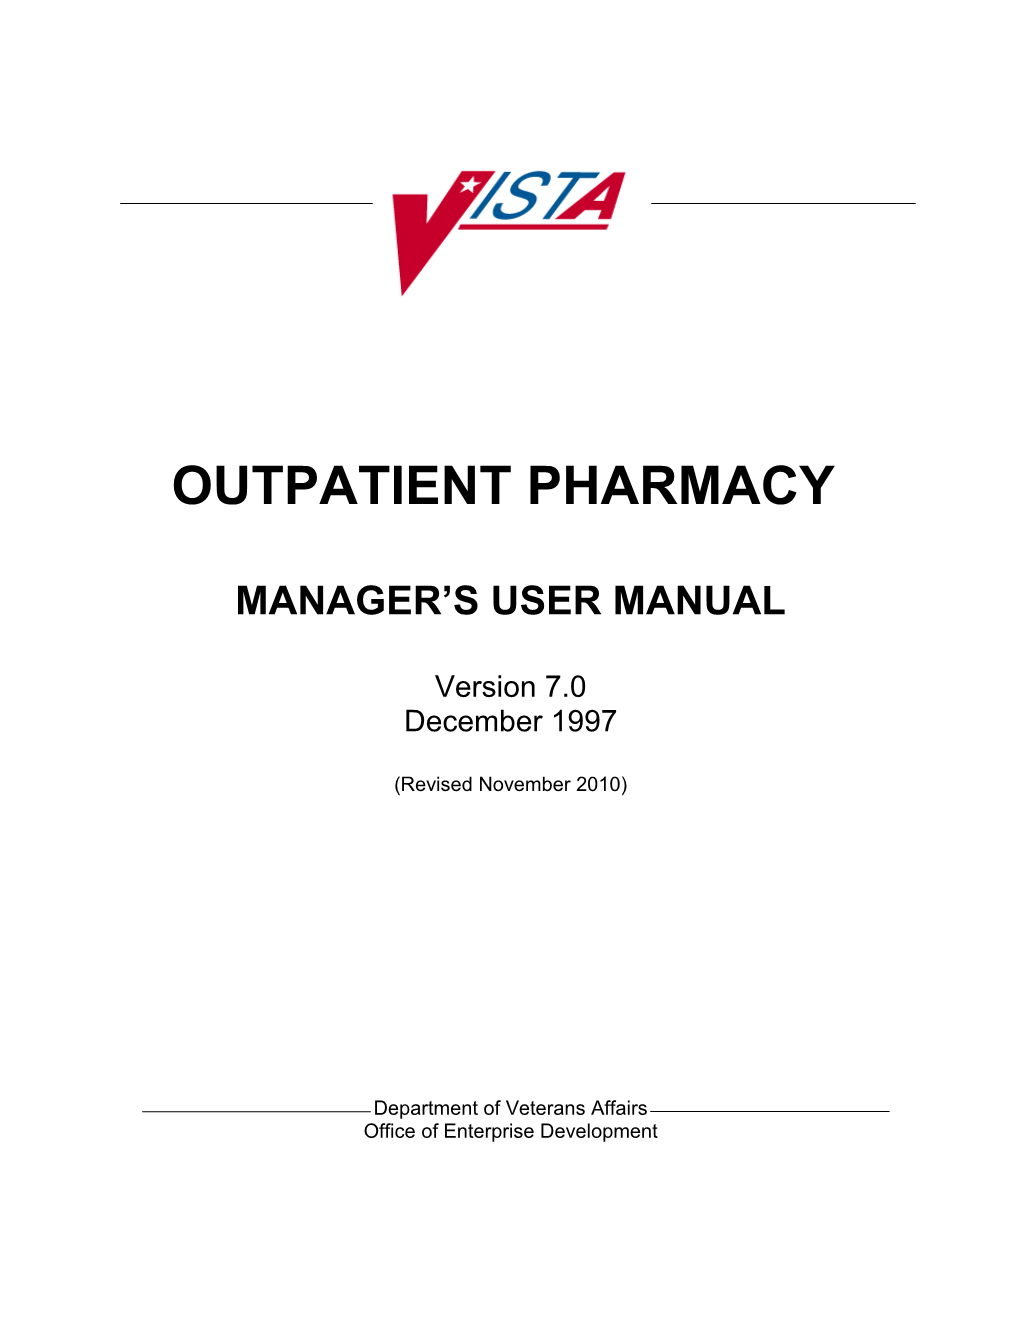 Outpatient Pharmacy User Manual